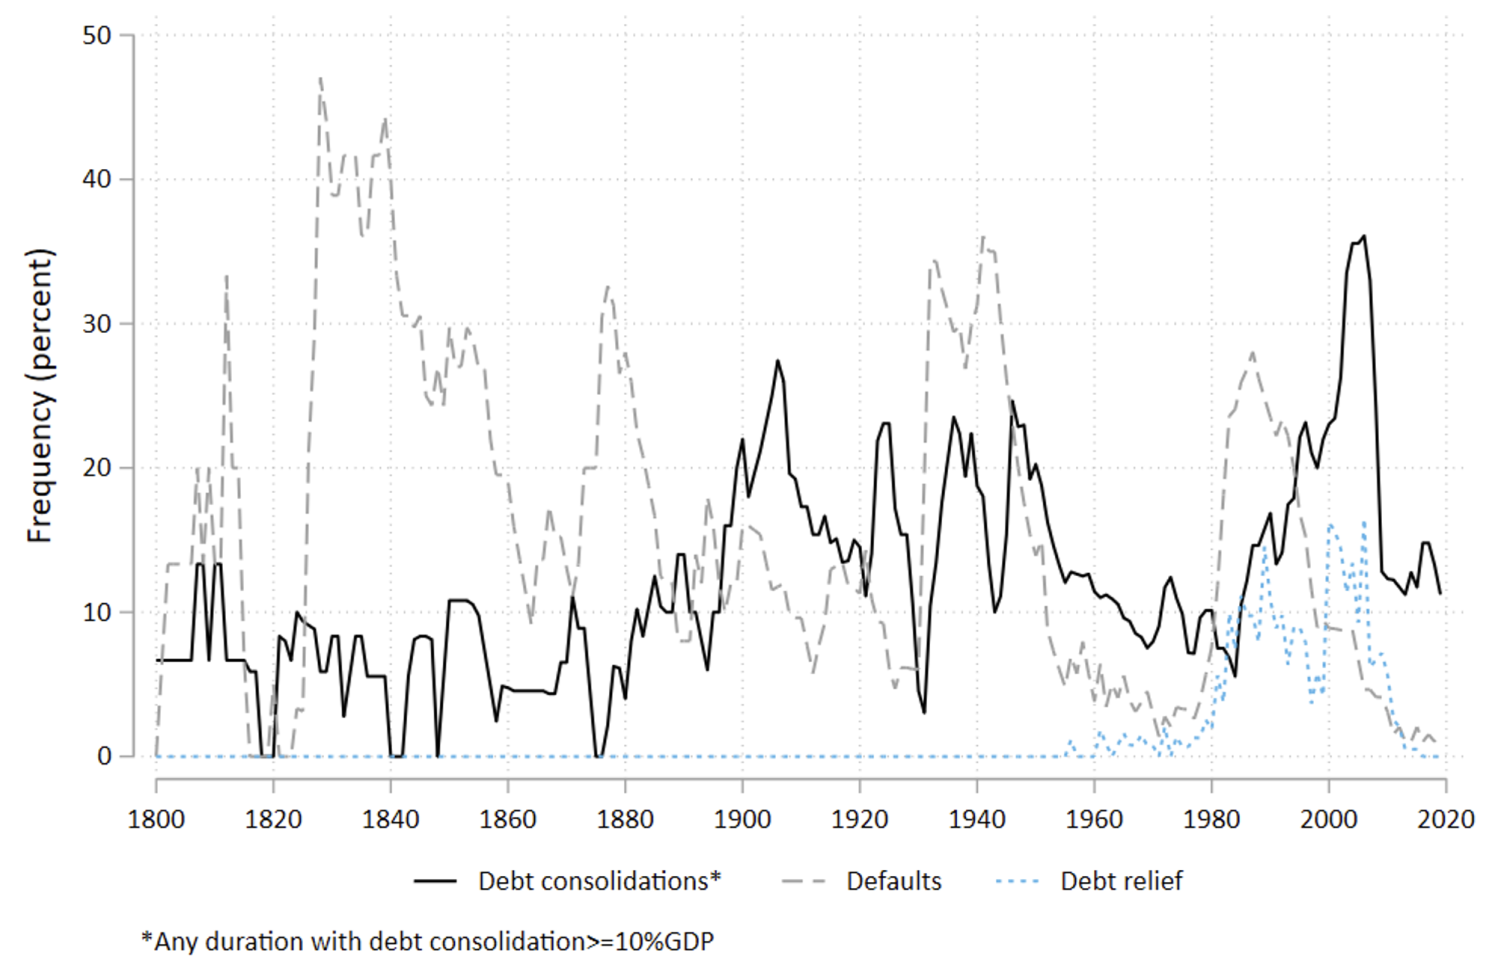 Figure 2 Frequency of debt consolidations (any duration) versus defaults and debt relief, 1800-2019